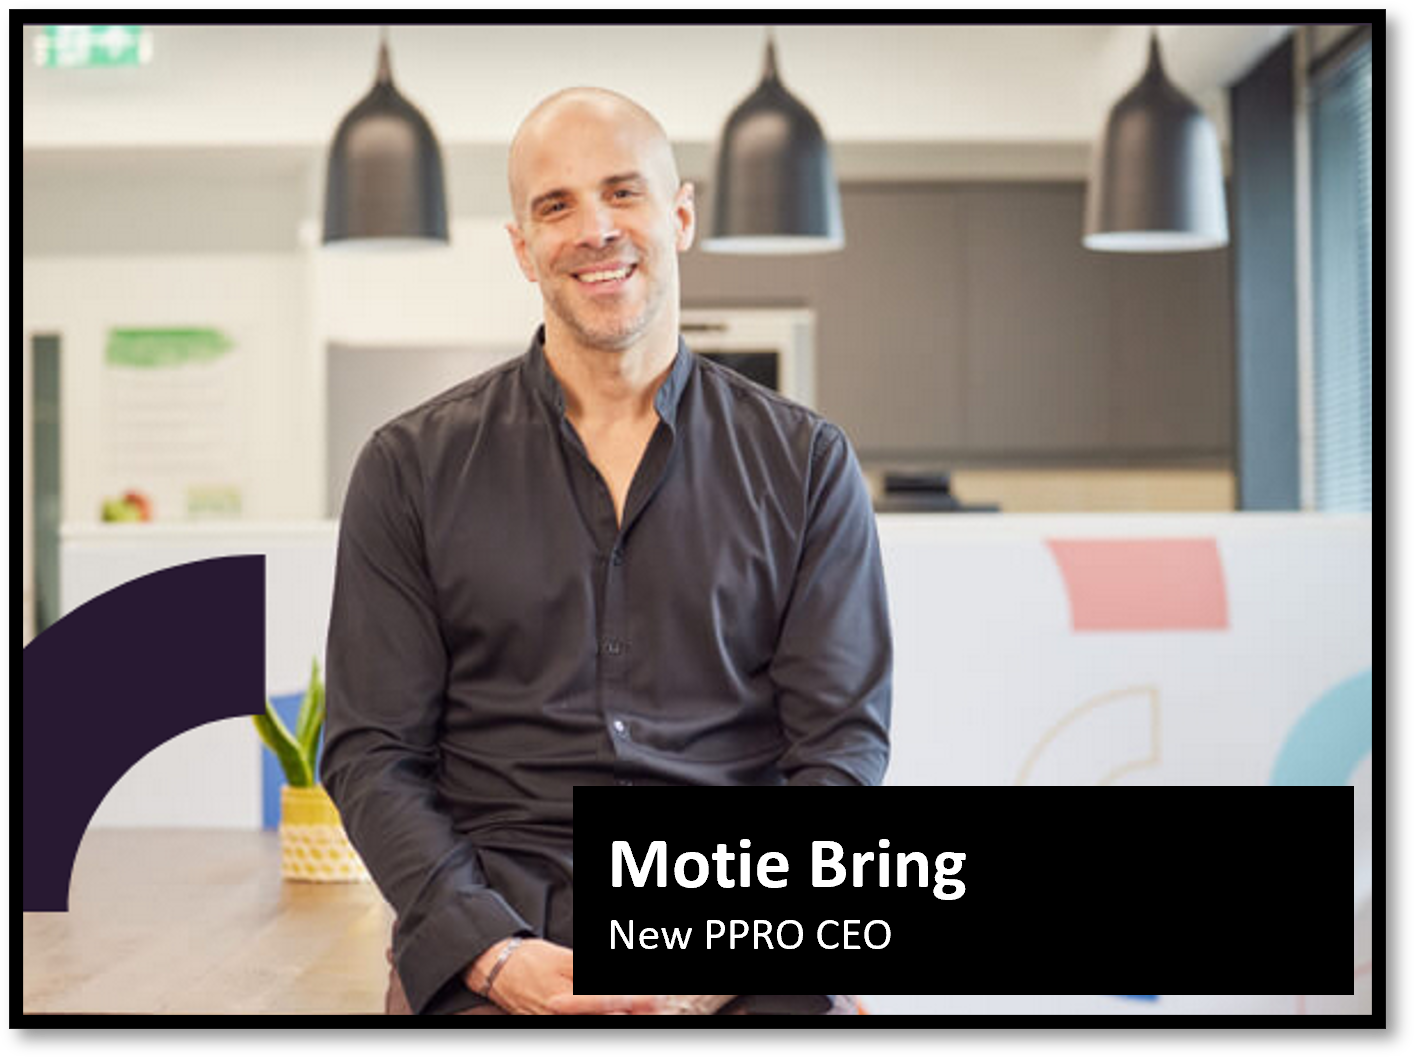 Motie Bring appointed CEO of payment company PPRO